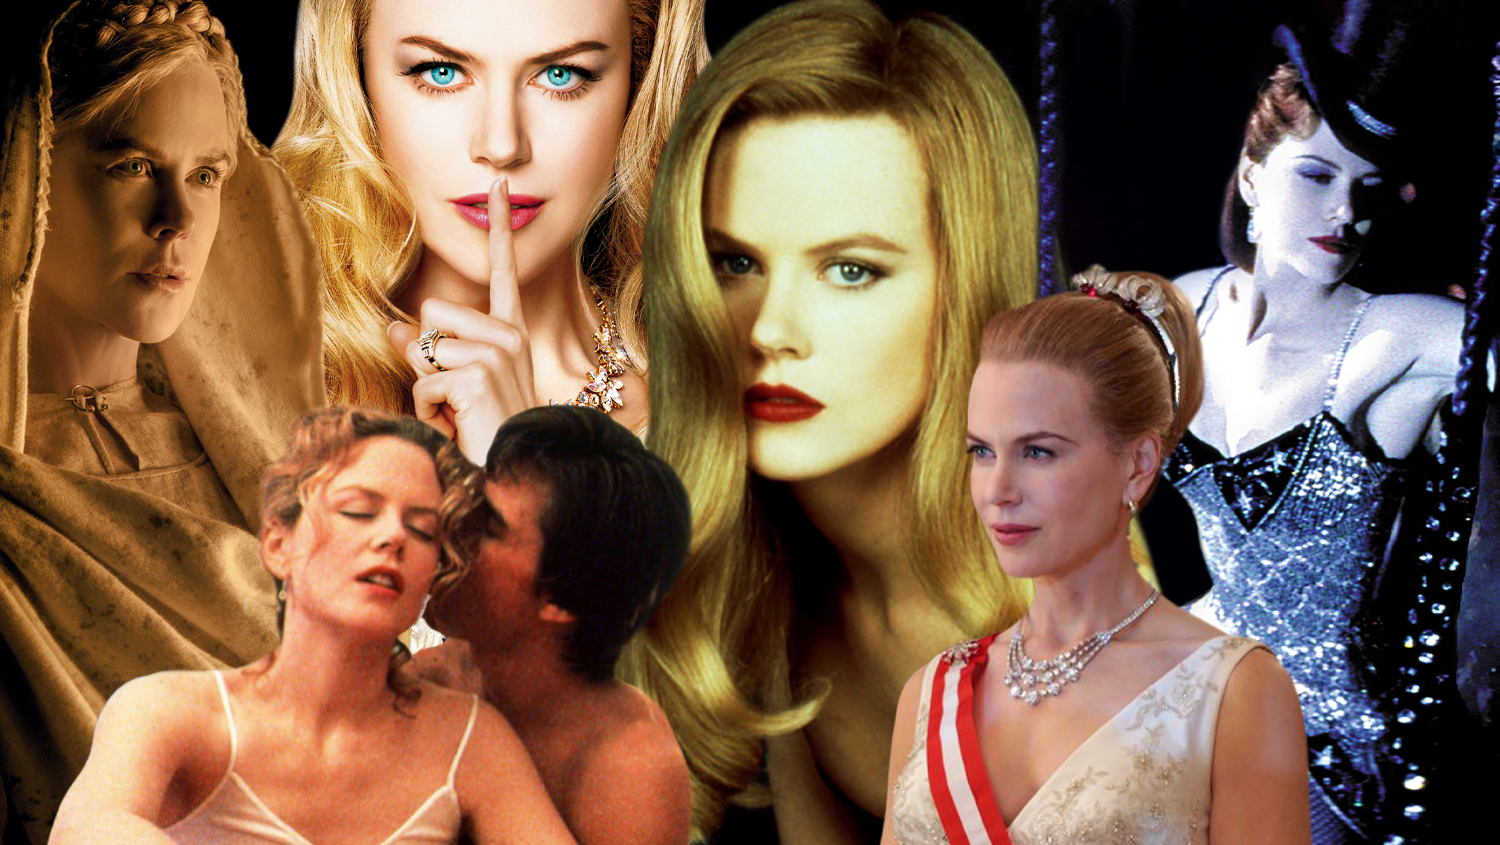 <p>Nicole Kidman has captivated audiences with her spellbinding acting for over 40 years and has excelled in theatre, film, and television. Not only is she an accomplished producer but a five-time Academy Award nominee. Her role as Virginia Woolf in The Hours  (2002) earned her the Oscar for Best Actress in 2002.</p> <p>Born in Honolulu, Hawaii in 1967, she began her career in Australia as a teenager with roles in Bush Christmas (1983) and BMX Bandits (1983). Her performance in Dead Calm (1989) would grab the attention of Hollywood, and Tom Cruise, casting her in her breakout role as neurologist Dr. Claire Lewicki, in Days of Thunder (1990).</p> <p>Her trajectory to establishing herself among Hollywood’s A-List continued as she starred alongside Cruise again in Far and Away (1992), mastered her comedic acting chops as an aspiring television personality in Gus Van Sant’s black comedy, To Die For (1995), and portrayed another doctor in the superhero film Batman Forever (1995), opposite Val Kilmer.</p> <p>Kidman made a highly lauded London stage debut in the fall of 1998, starring with Iain Glen in The Blue Room, David Hare’s modern adaptation of Schnitzler’s La Ronde. For her performance, Kidman won London’s Evening Standard Award and was nominated in the Best Actress category for a Laurence Olivier Award. Other standout performances include Stanley Kubrick’s Eyes Wide Shut (1999); and Baz Luhrmann’s Moulin Rouge! (2001); Jonathan Glazer’s Birth (2004) and Yorgos Lanthimos’s The Killing of a Sacred Deer (2017).</p> <p>Her most recent projects in television include Expats (2024), Special Ops: Lioness (2023), Nine Perfect Strangers (2021), and the critically acclaimed, The Undoing (2022).</p> <p>Throughout her distinguished career, Kidman has won a BAFTA Award, two Emmys, and six Golden Globes – and is widely regarded as one of the finest actresses of her generation. She co-founded her production company Blossom Films in 2010. Kidman has earned a reputation for her extraordinary talent, commitment to her craft, and desire to work with auteur filmmakers including Jane Campion, Sofia Coppola, Anthony Minghella, Sydney Pollack, Lars von Trier, and Aaron Sorkin. </p> <p>Take a look back at Nicole Kidman’s career in film and television.</p>